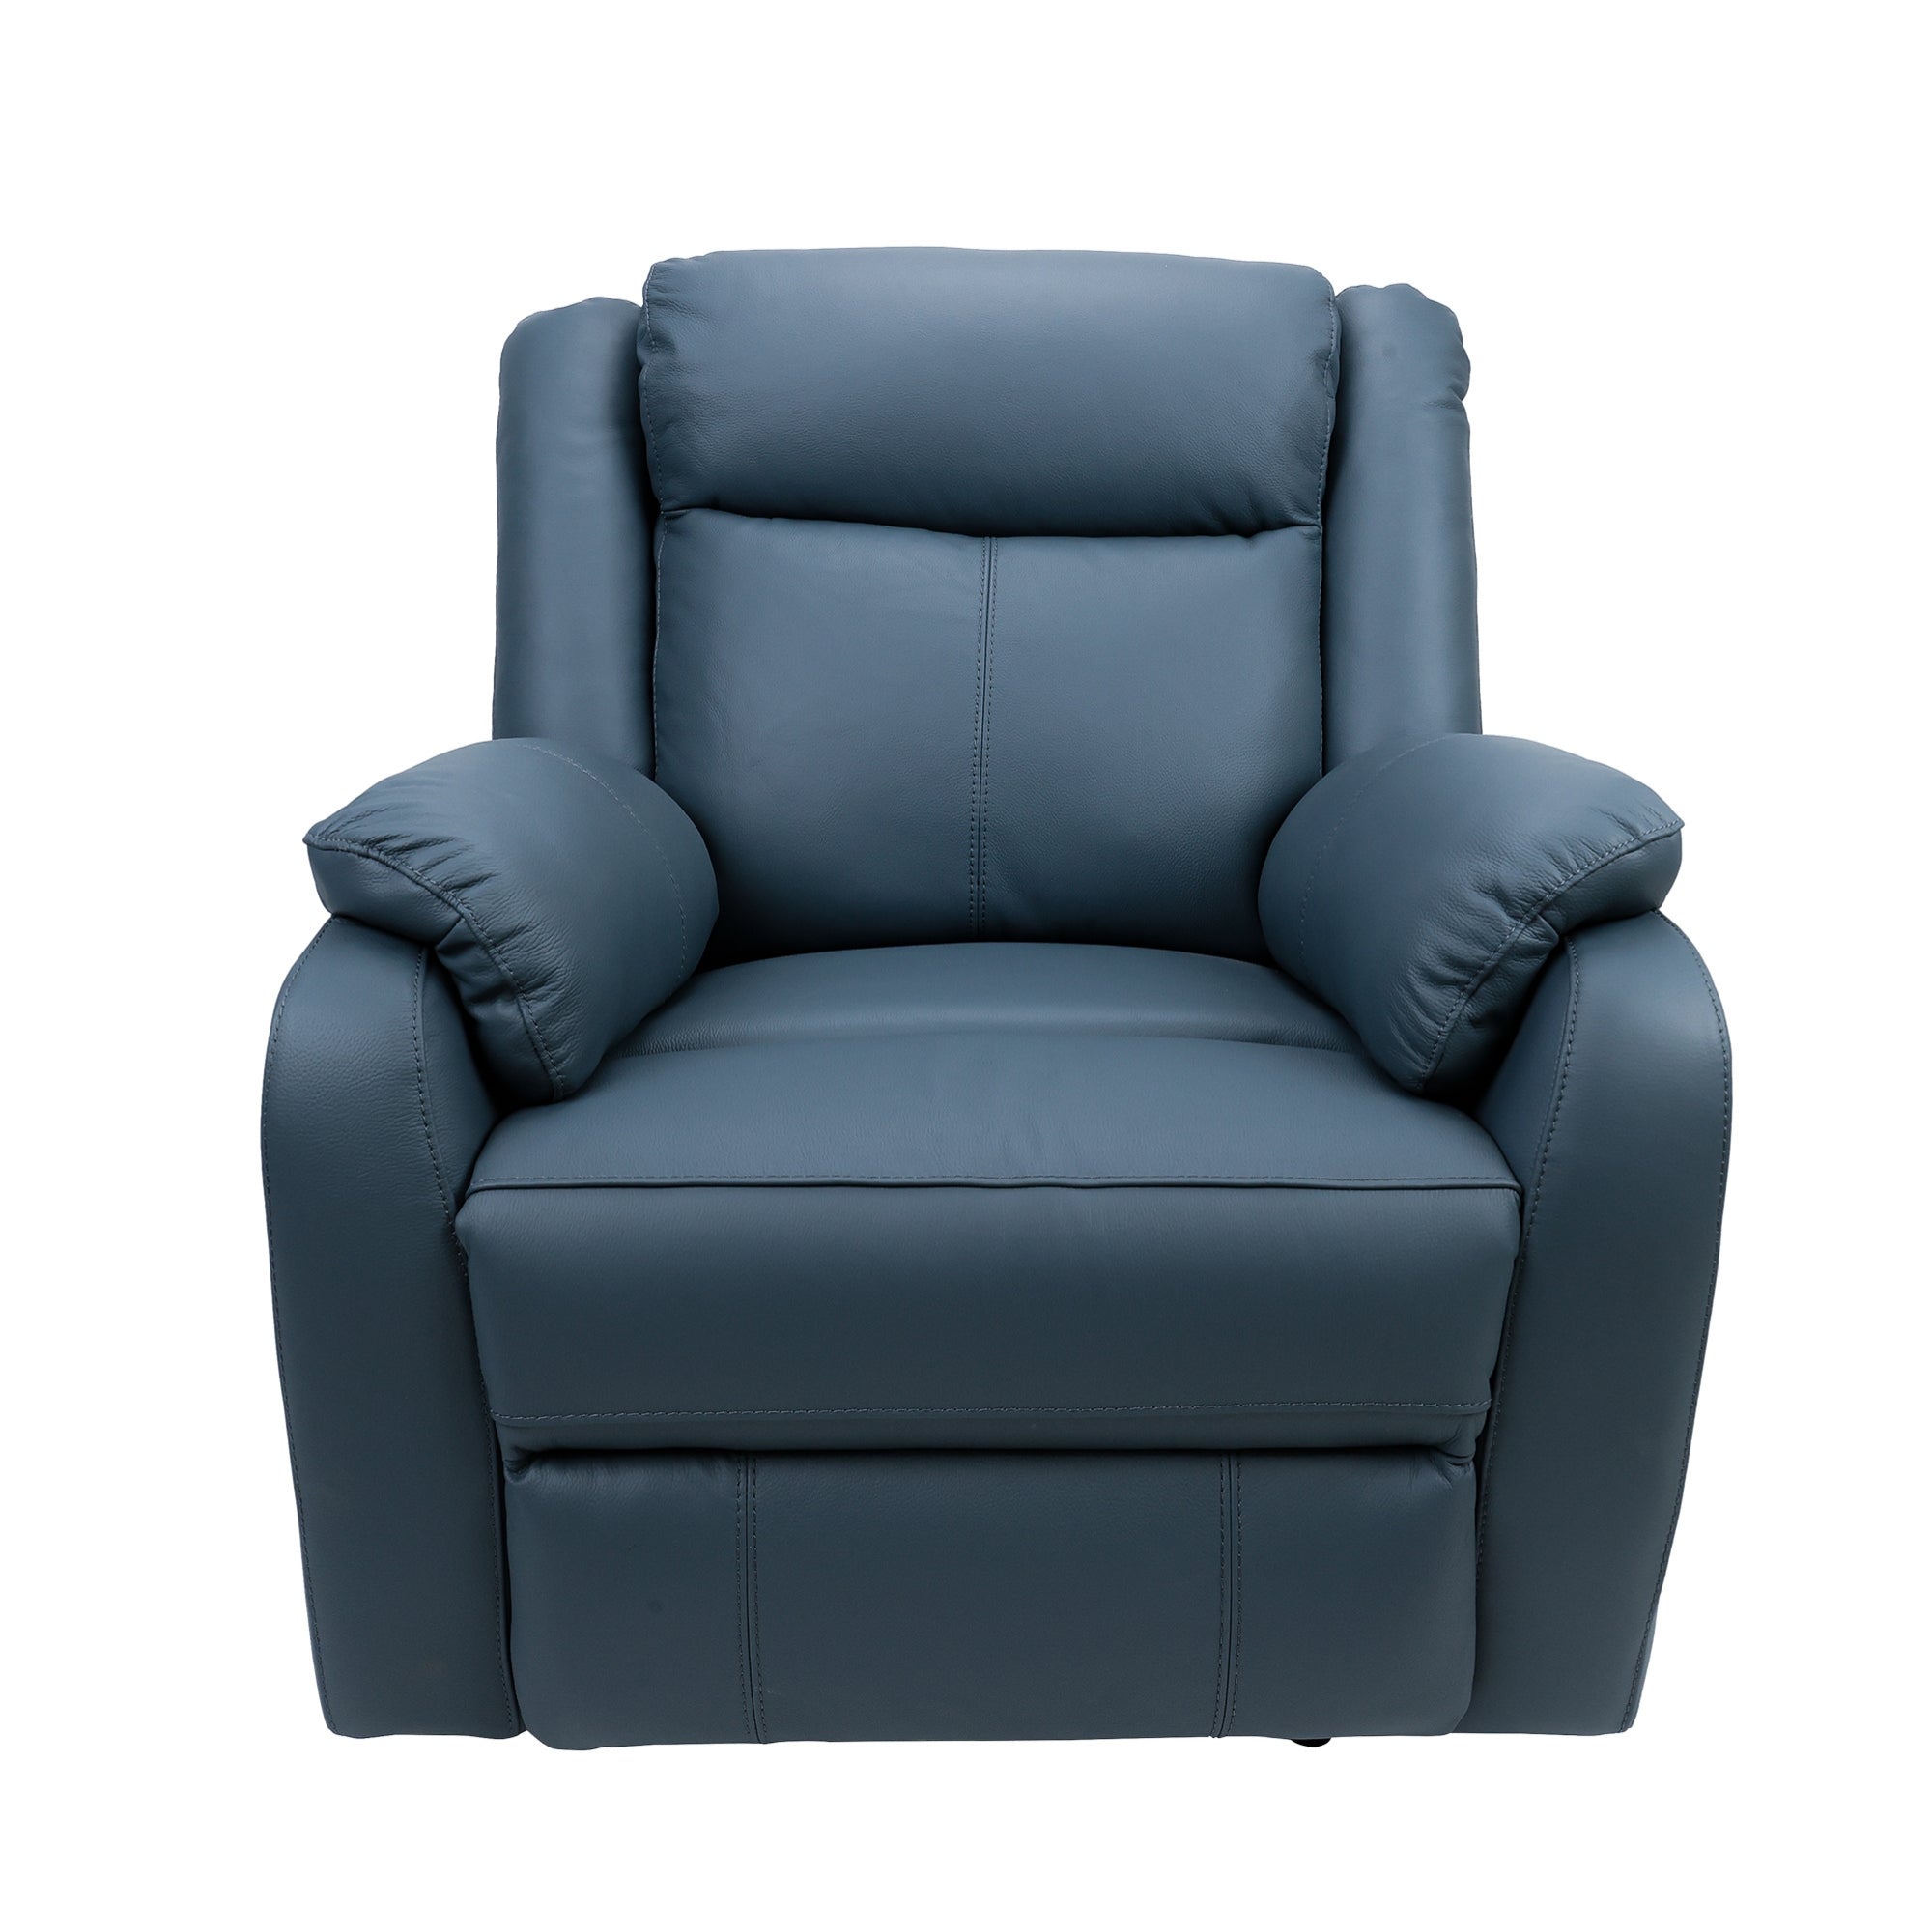 Blue Genuine Leather Electric Recliner Lounge Set with USB